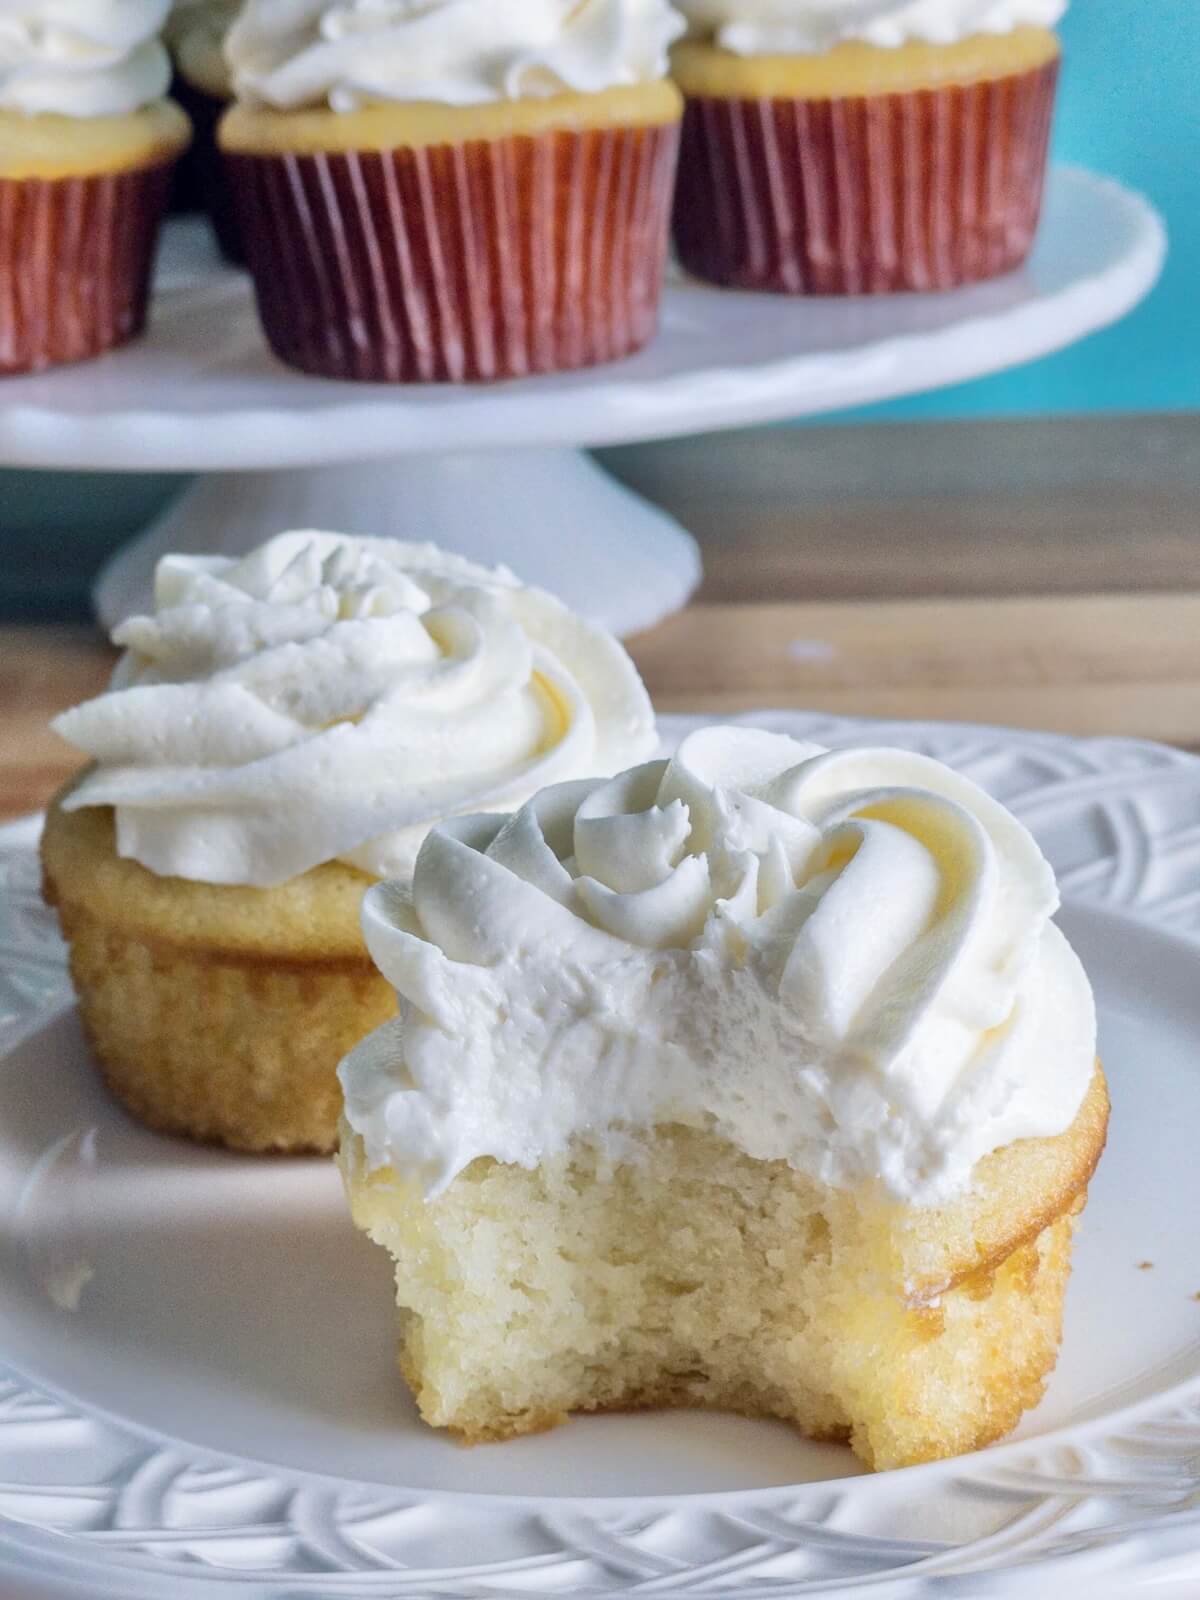 Delicious Cupcake Recipes That Don't Need Frosting